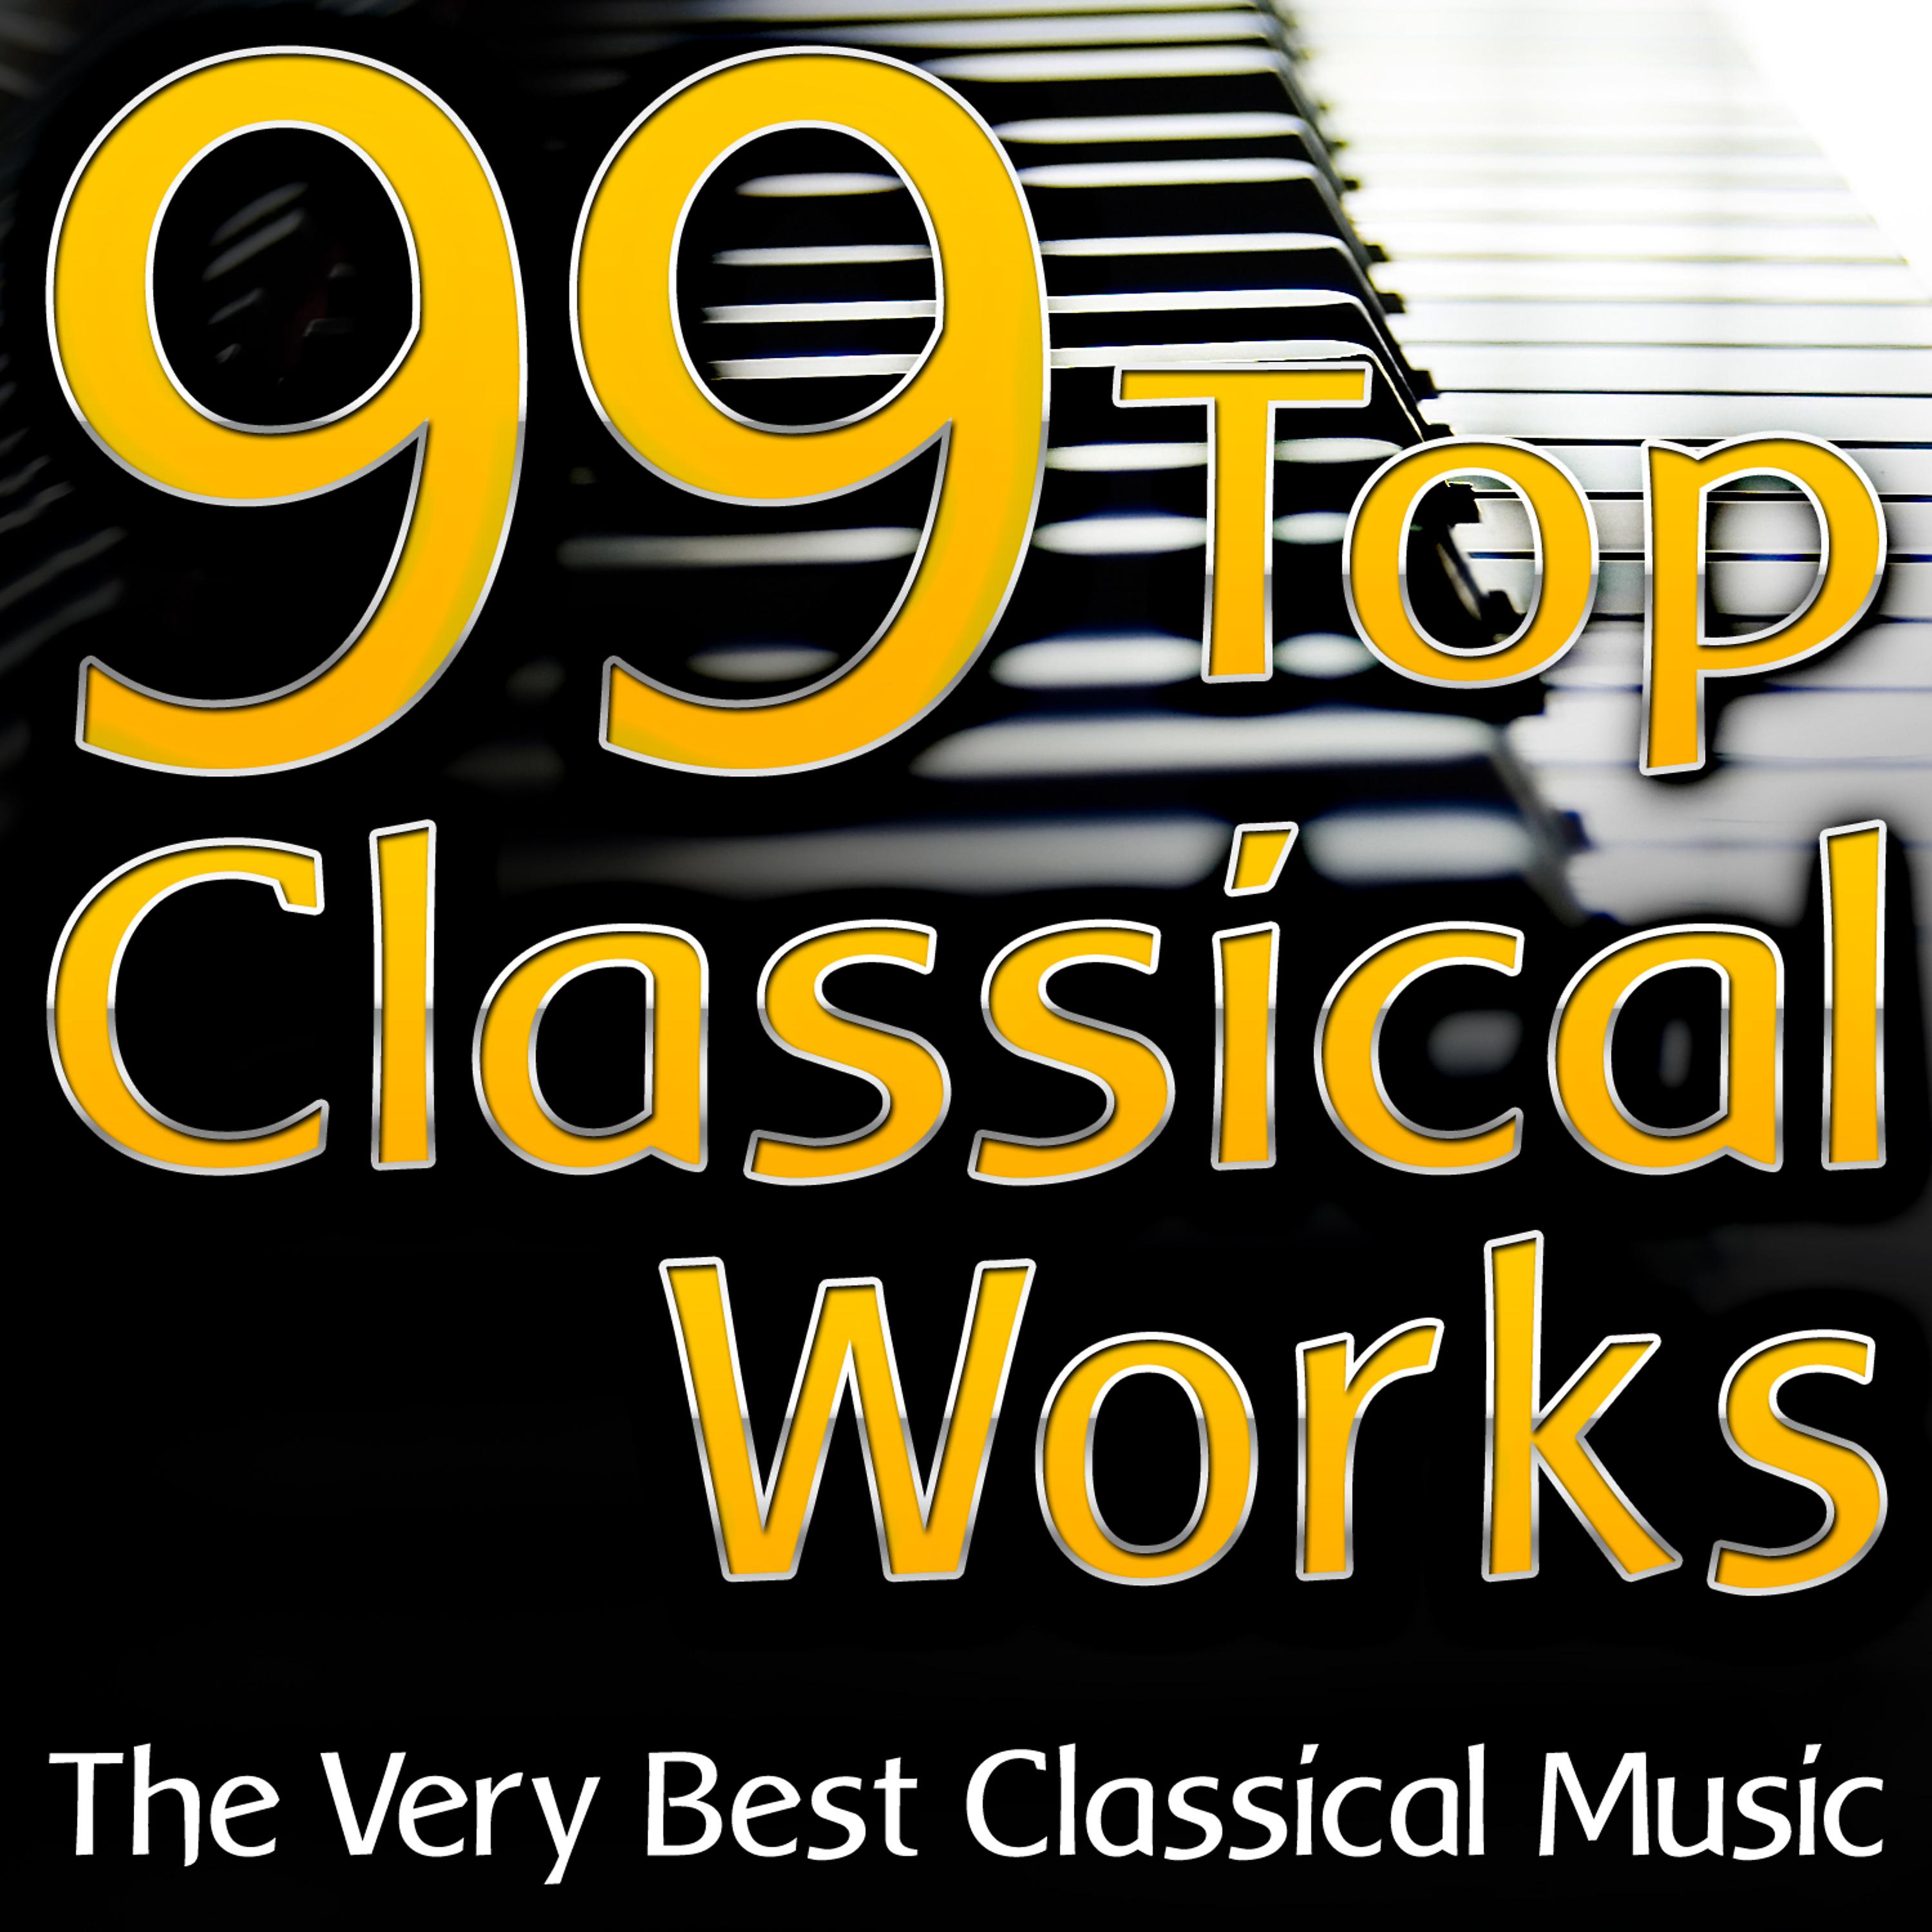 Постер альбома 99 Top Classical Works (The Very Best Classical Music)